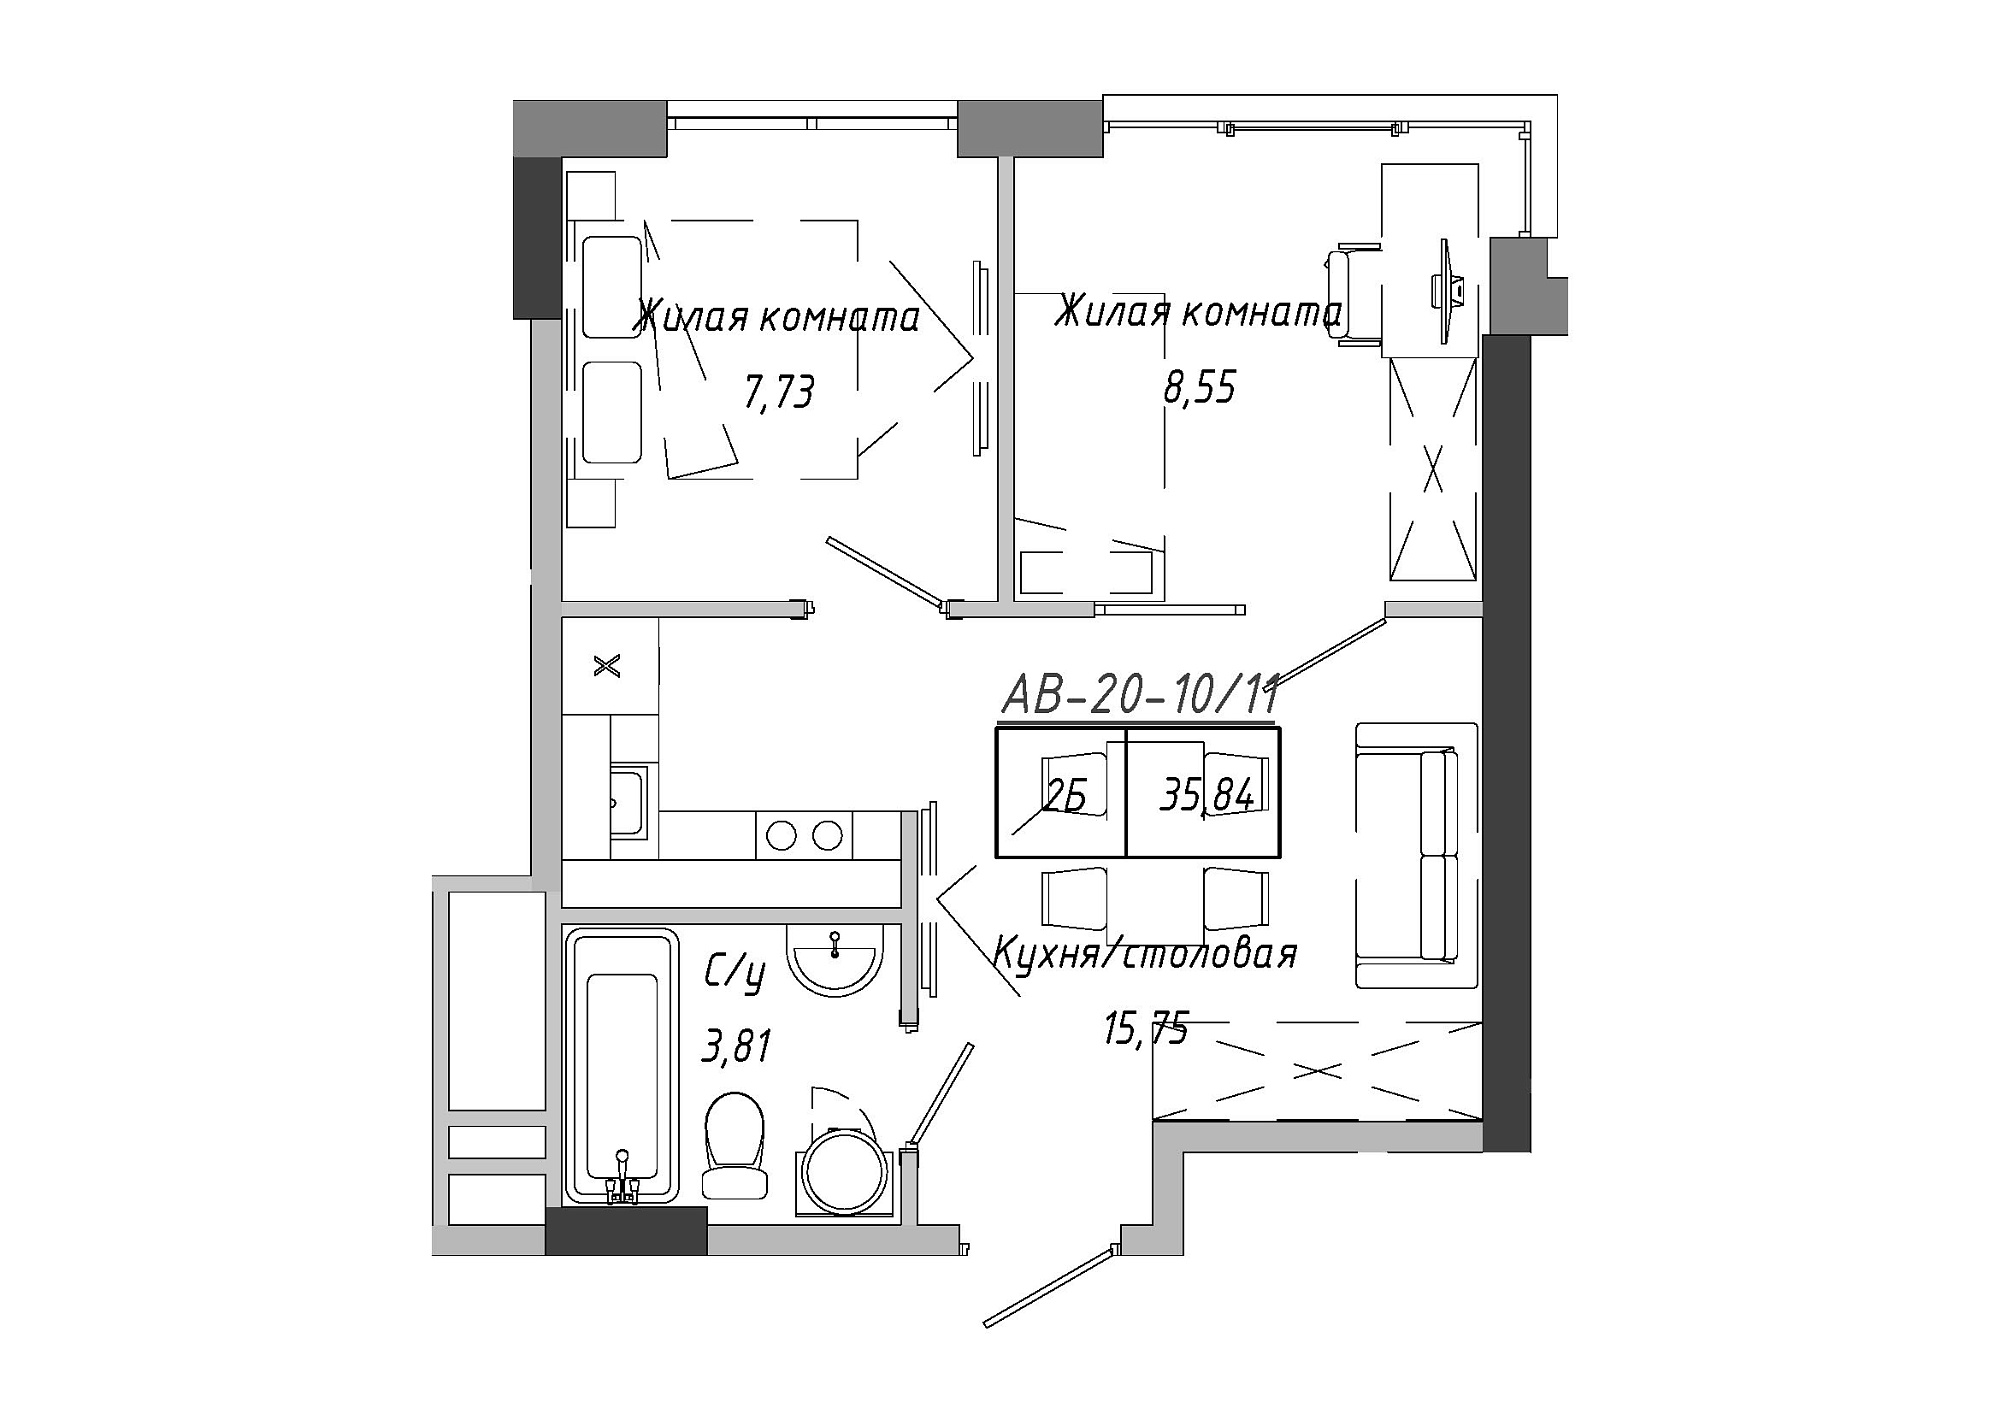 Planning 2-rm flats area 36.12m2, AB-20-10/00011.